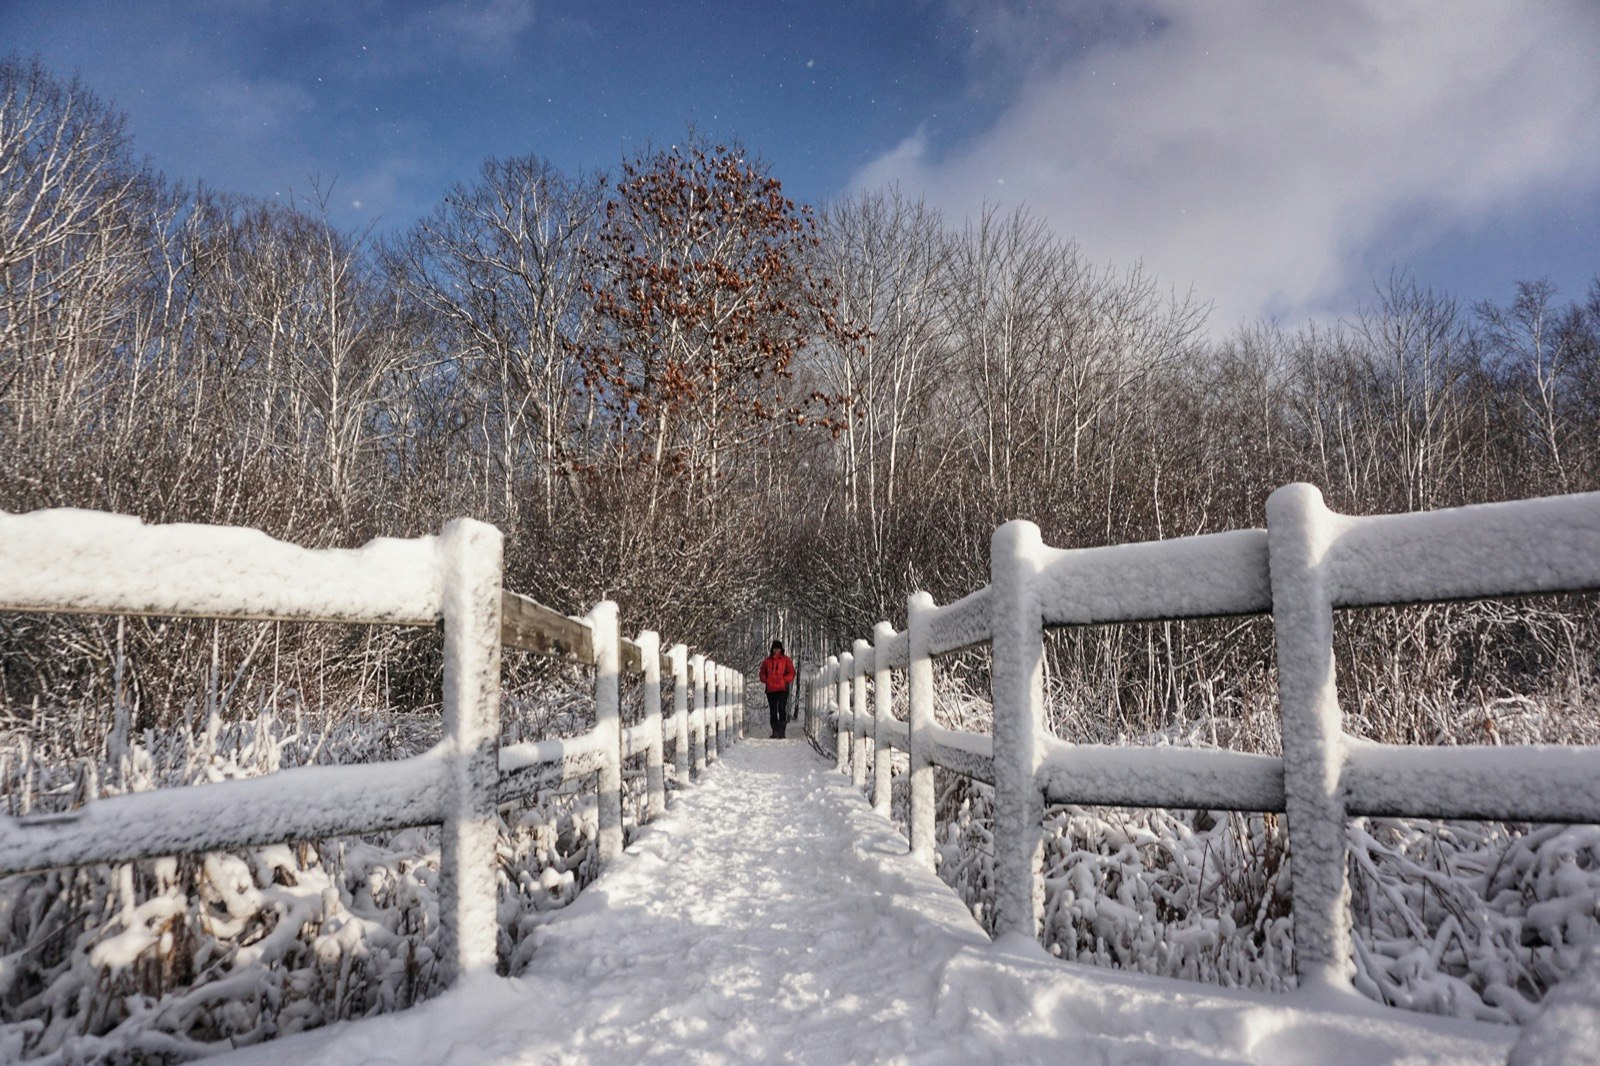 Fresh snow on the paths through the green belt around Ottawa. A person walking on a boardwalk. Red jacket stands out in the white.